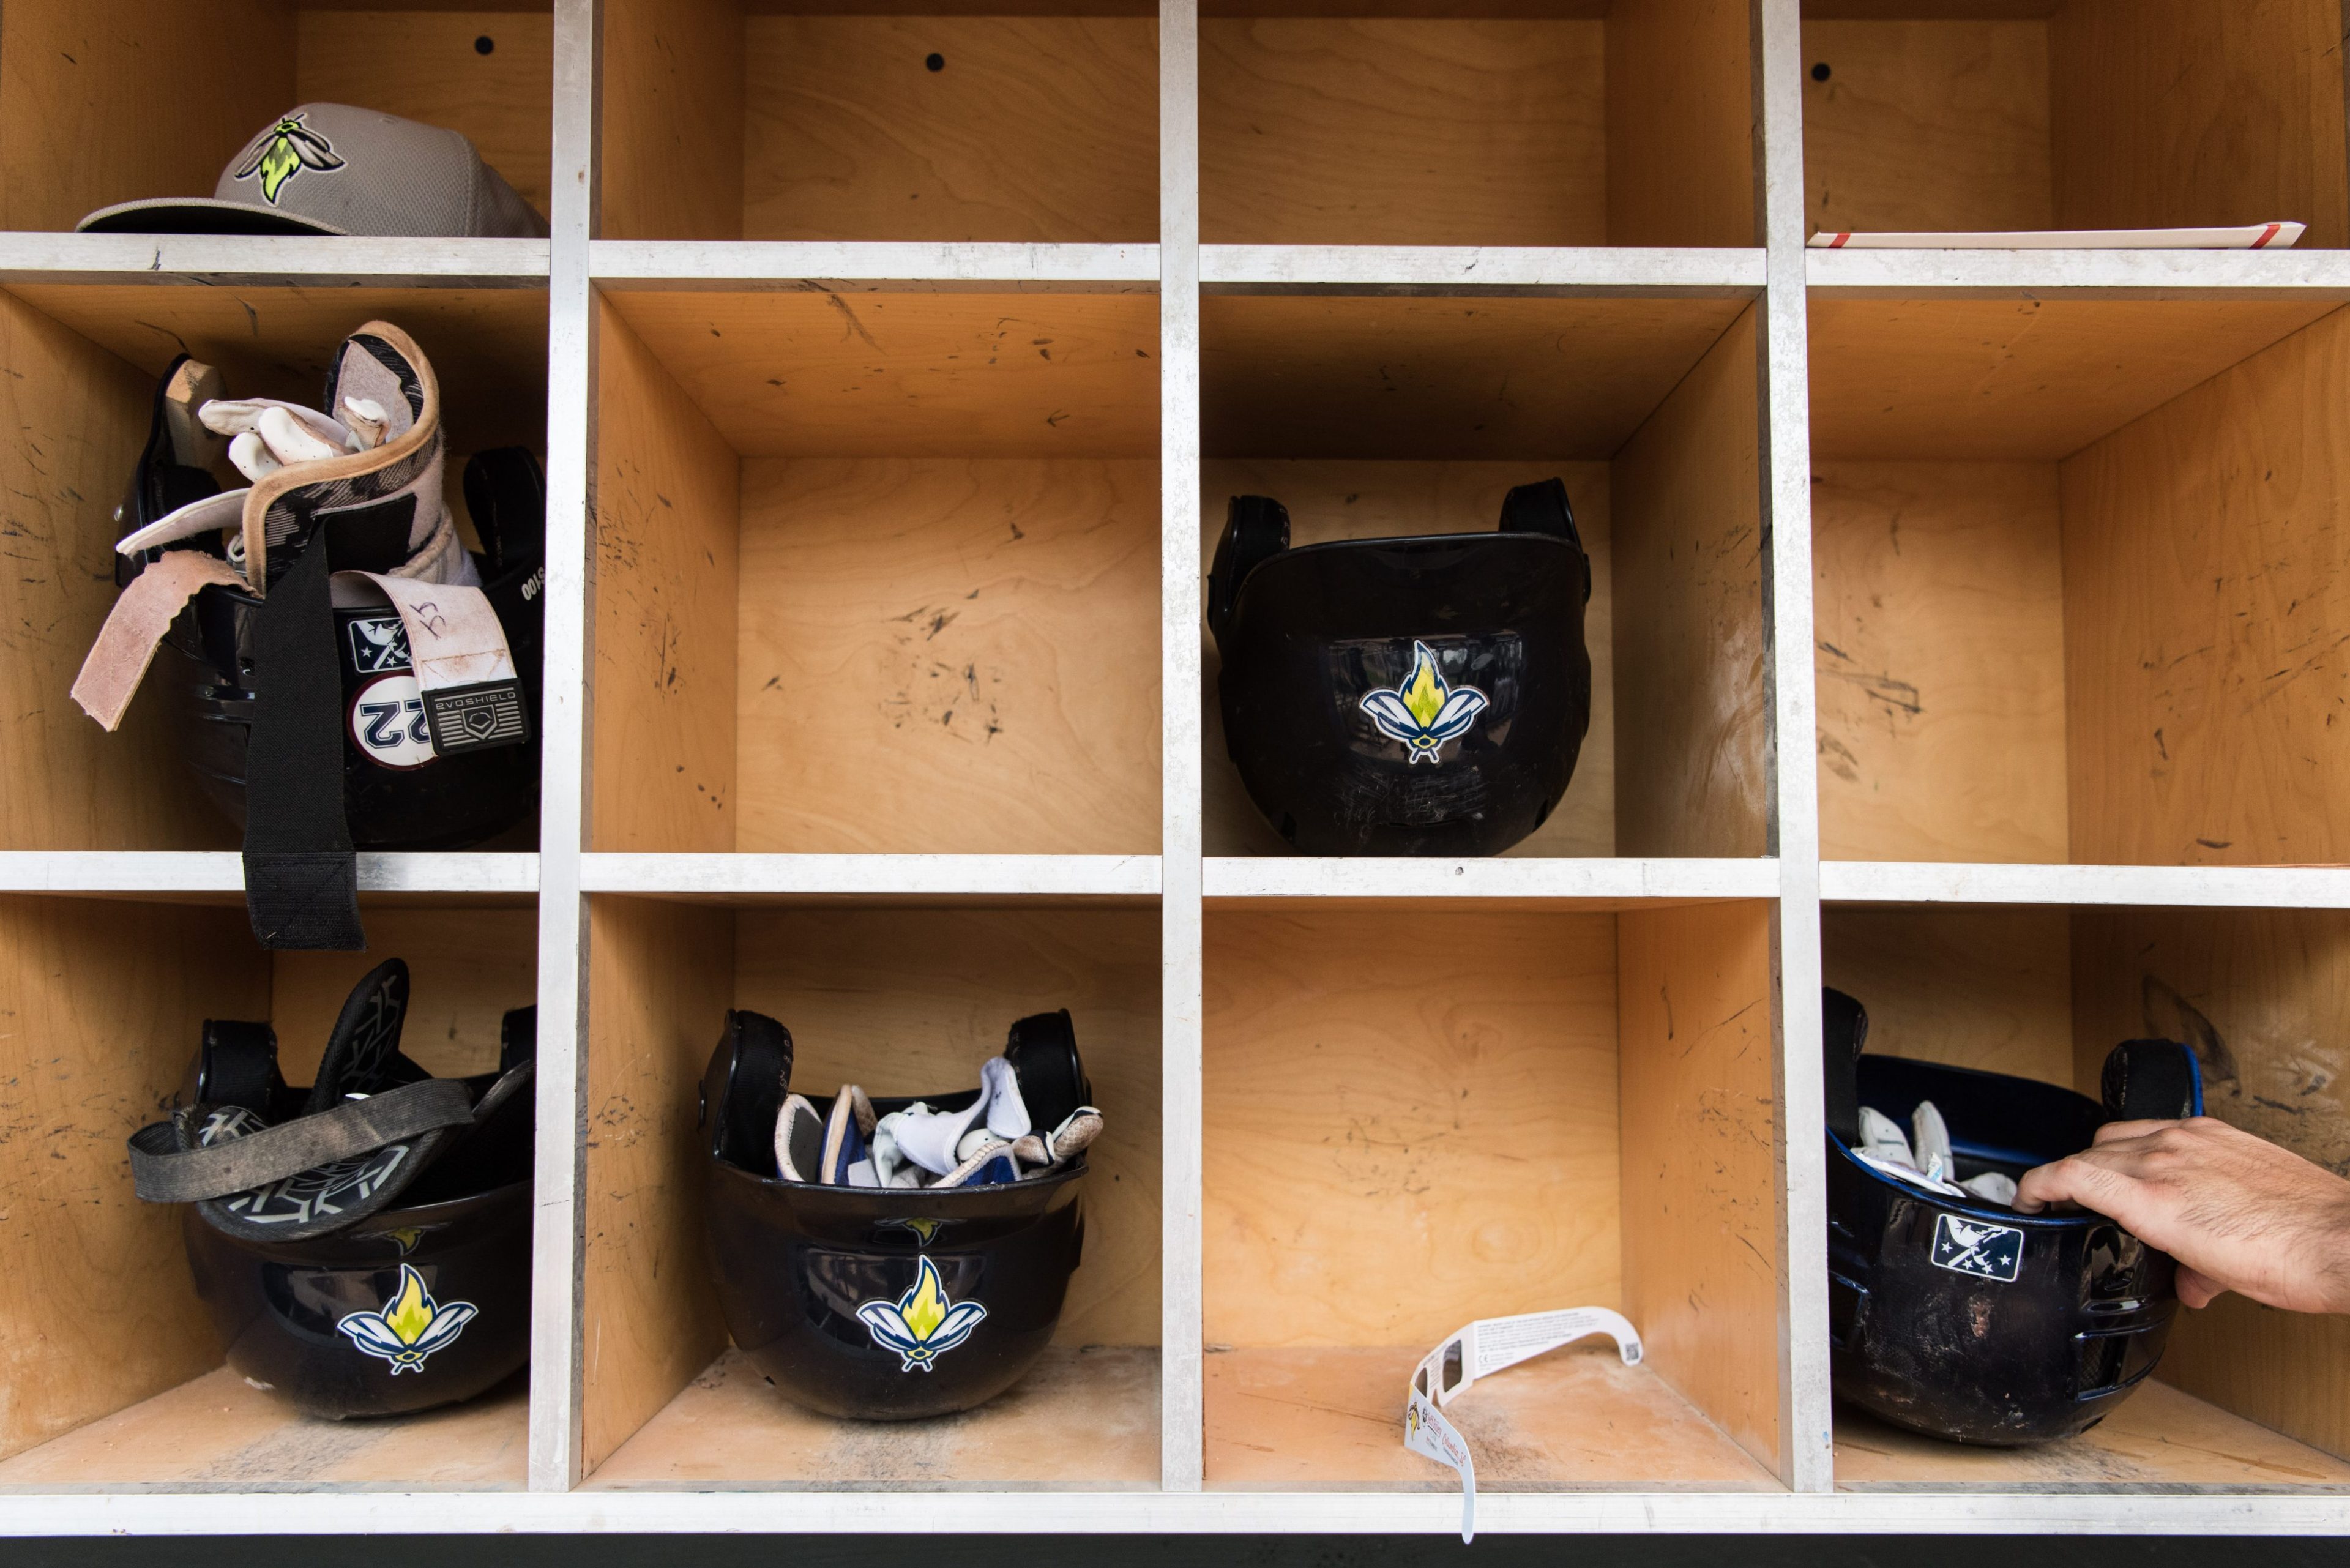 Helmets (and a pair of eclipse glasses) in the dugout of a minor league baseball team in Columbia, SC.